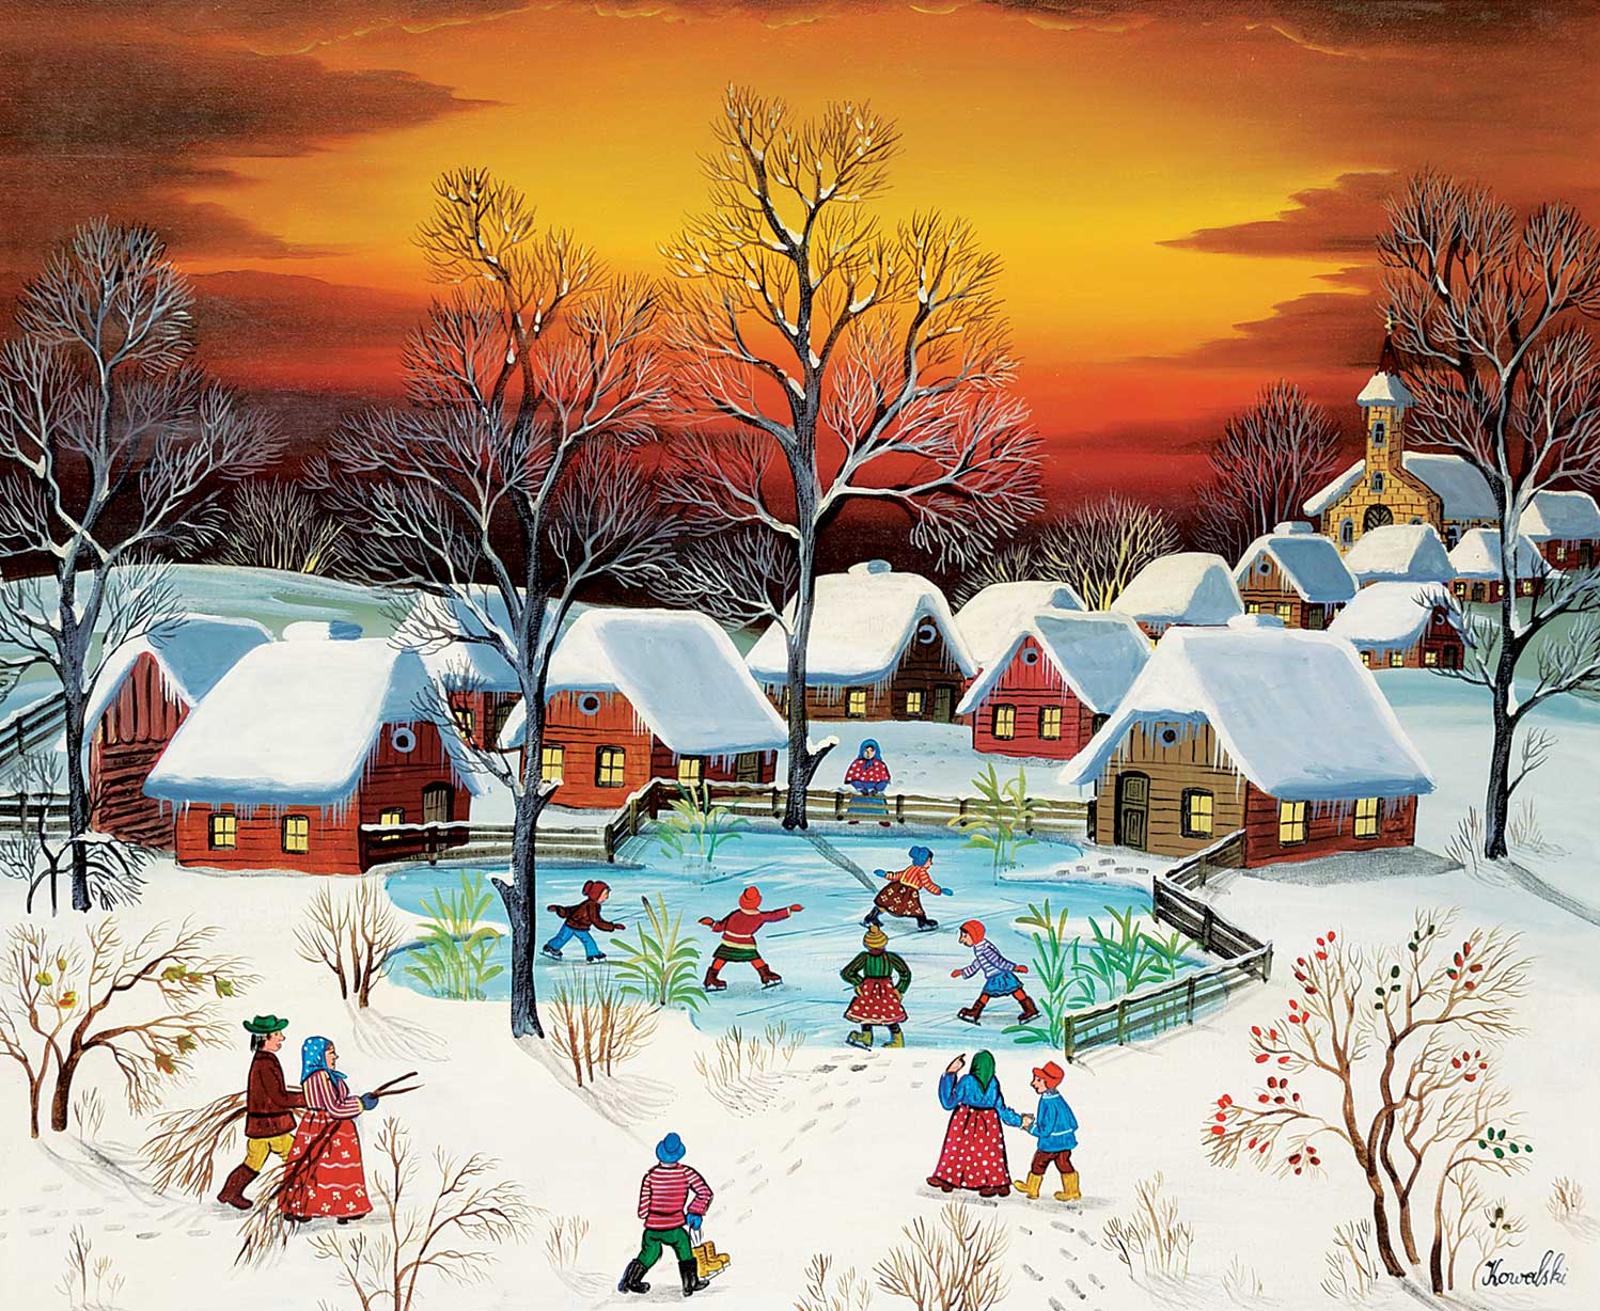 A. Kowalski - Untitled - Skating in the Village